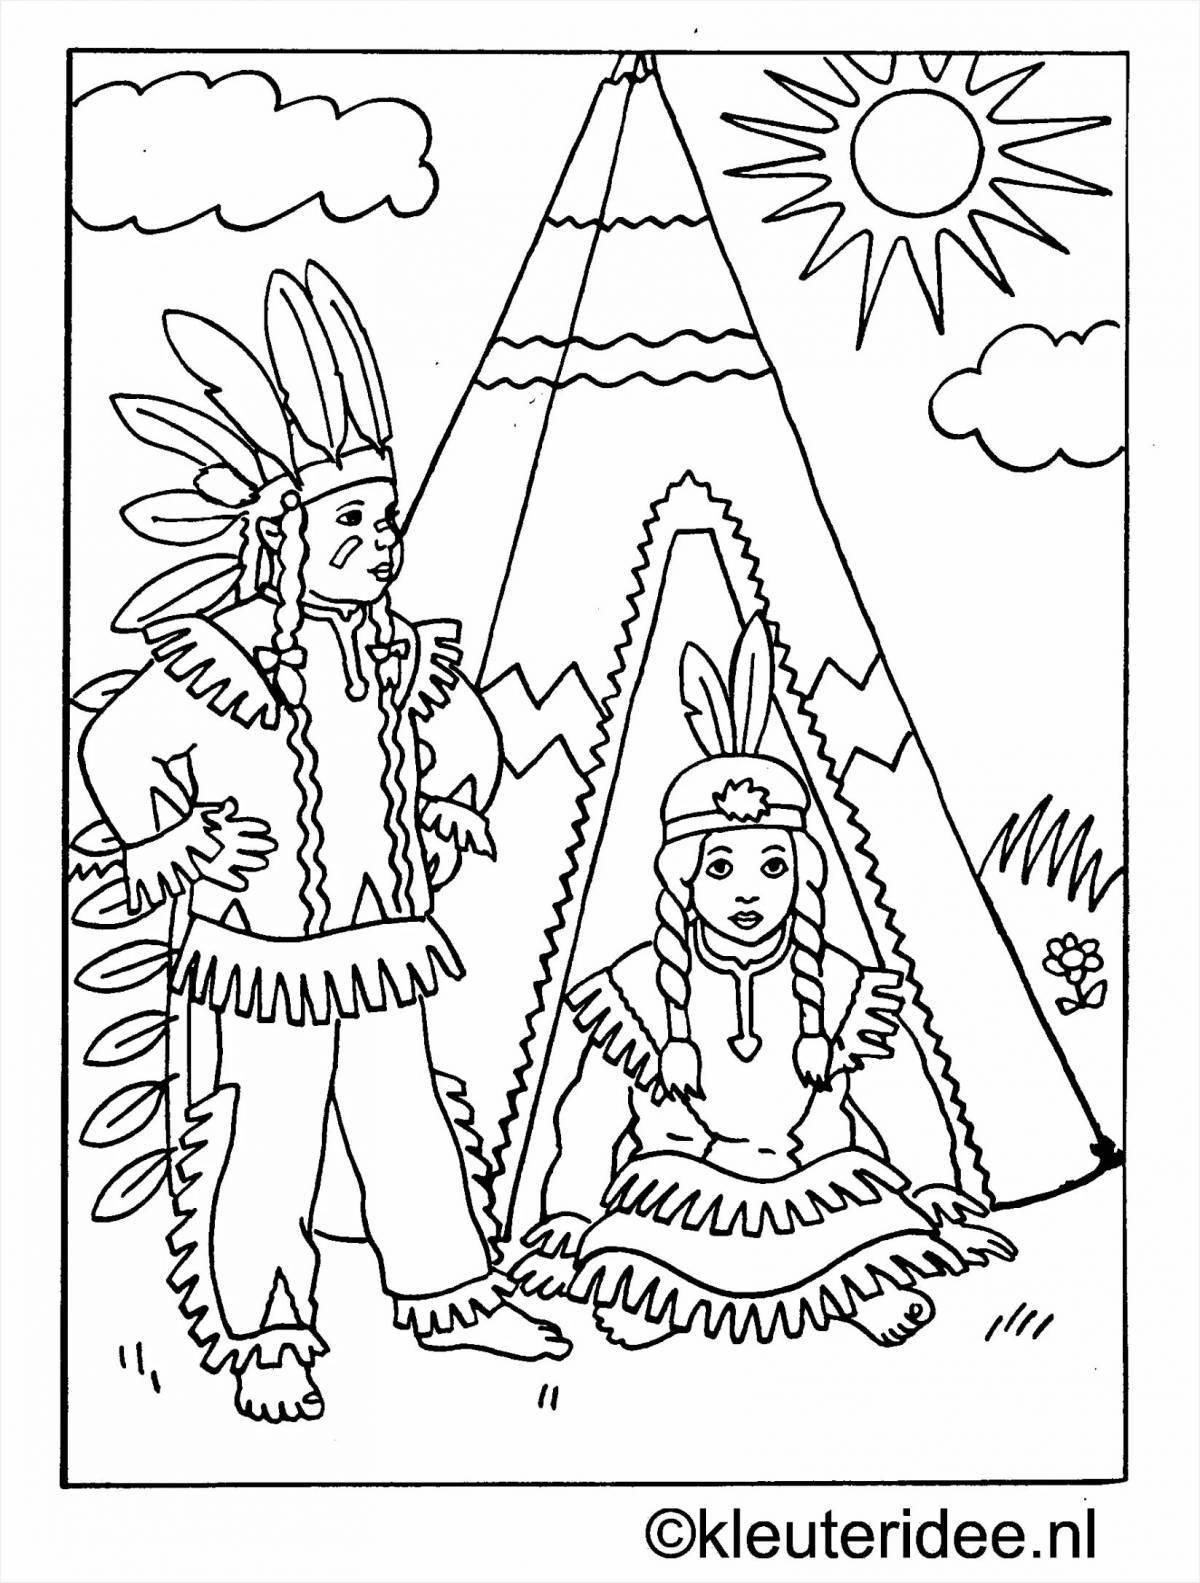 A fascinating Indian coloring book